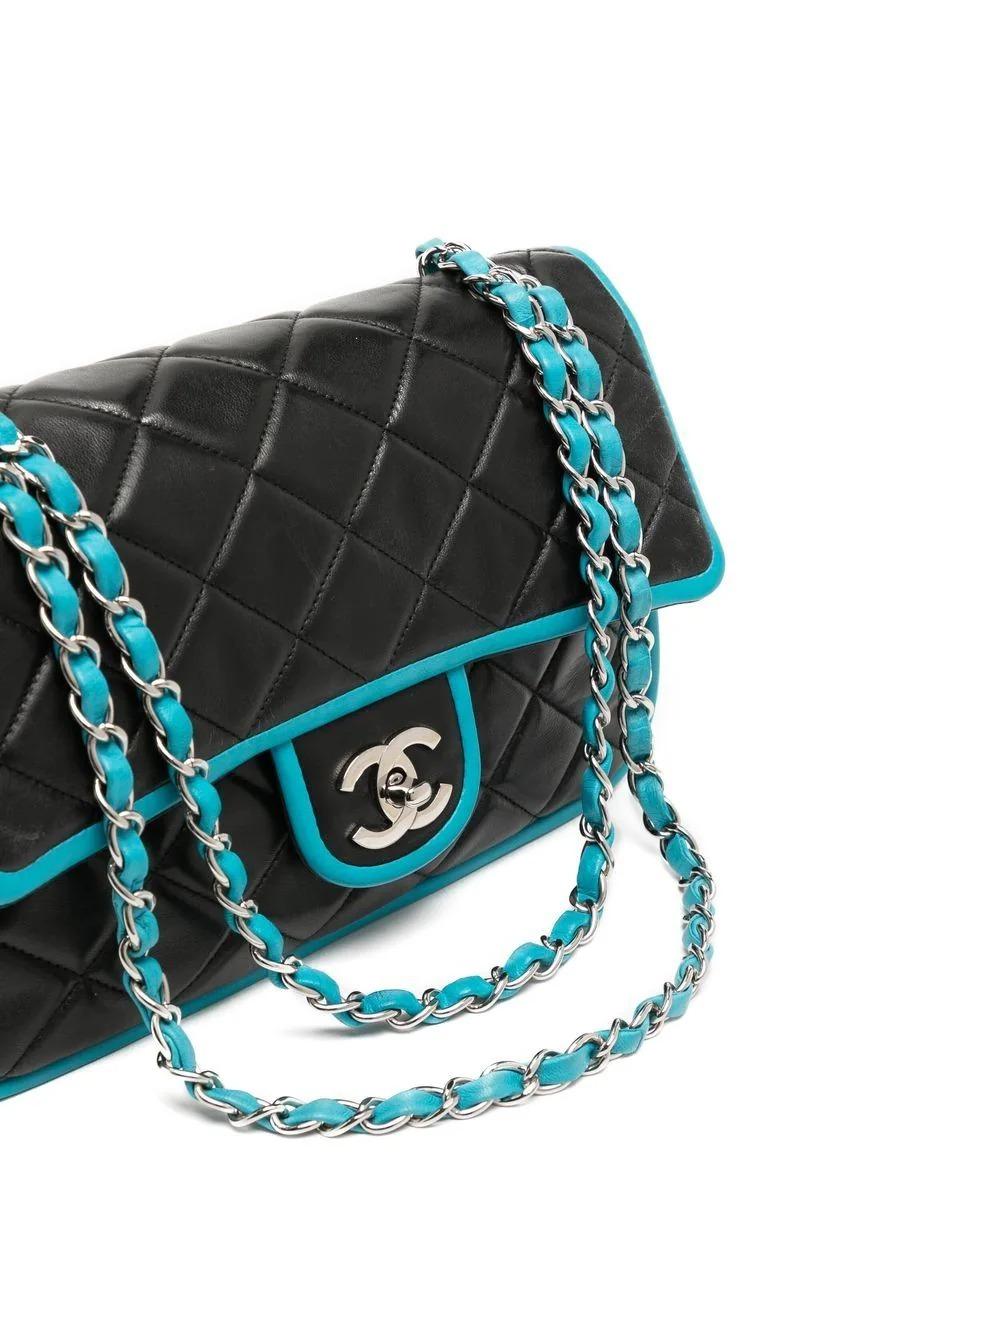 Chanel 2006 Medium Double Classic Flap in Black Lambskin Turquoise Piping Bag In Good Condition For Sale In Miami, FL